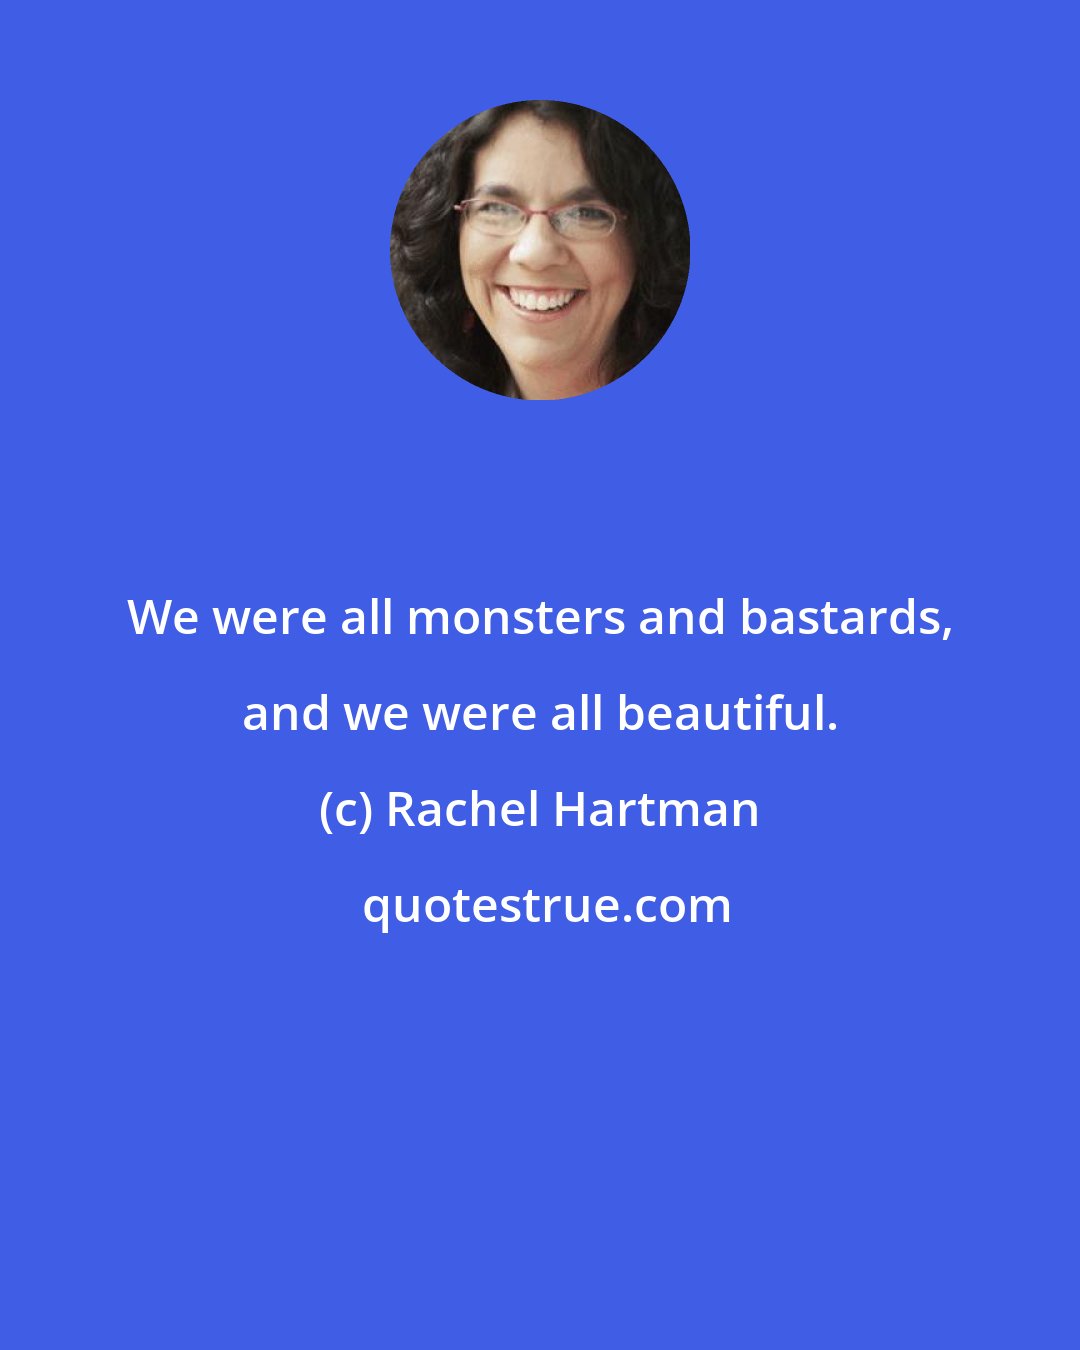 Rachel Hartman: We were all monsters and bastards, and we were all beautiful.